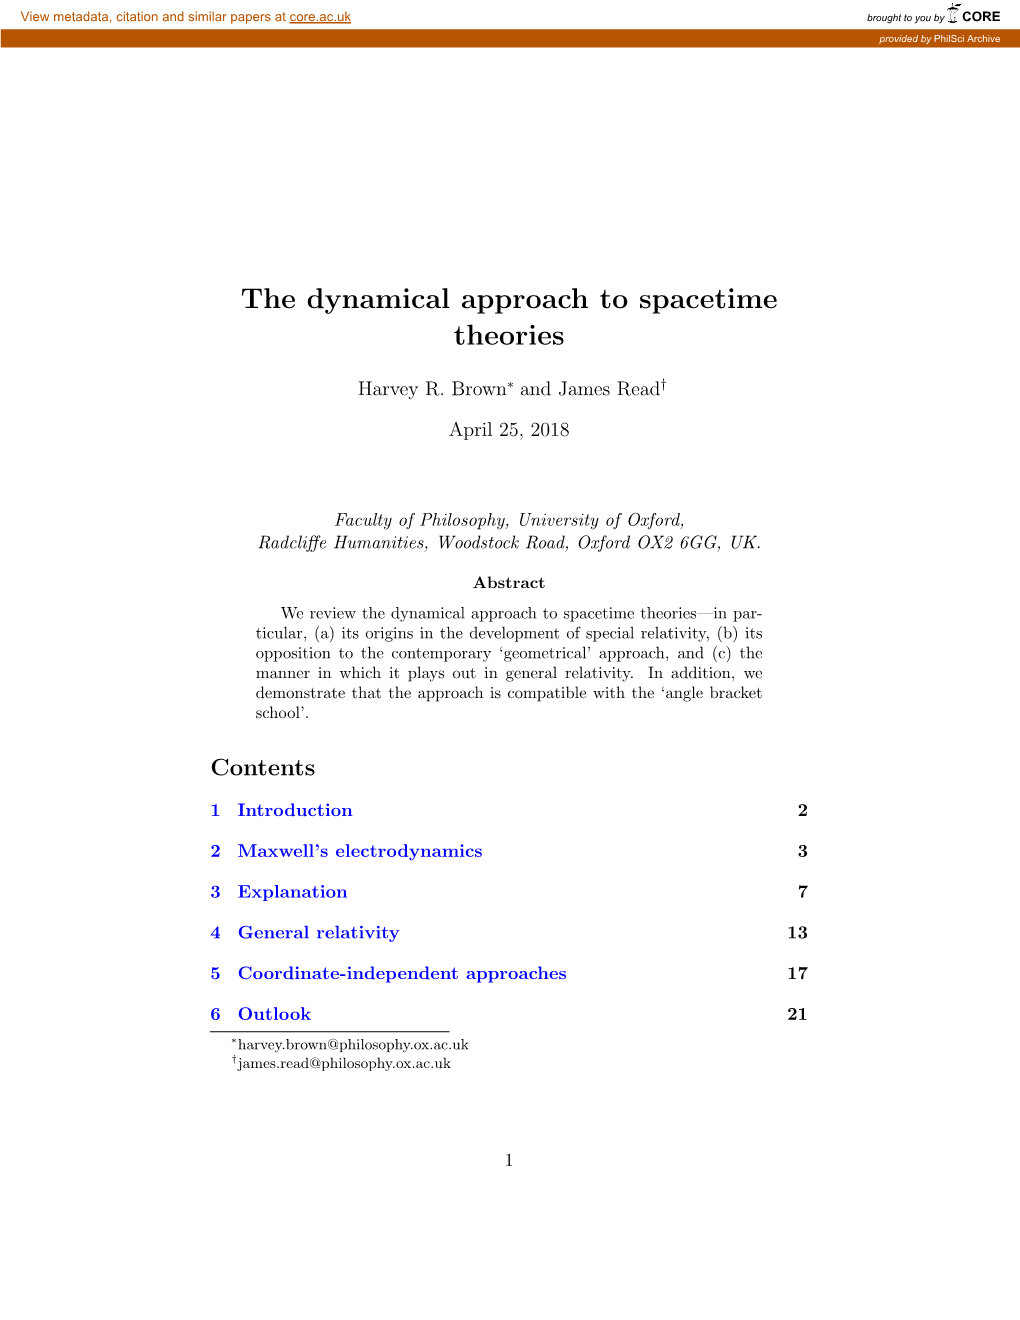 The Dynamical Approach to Spacetime Theories